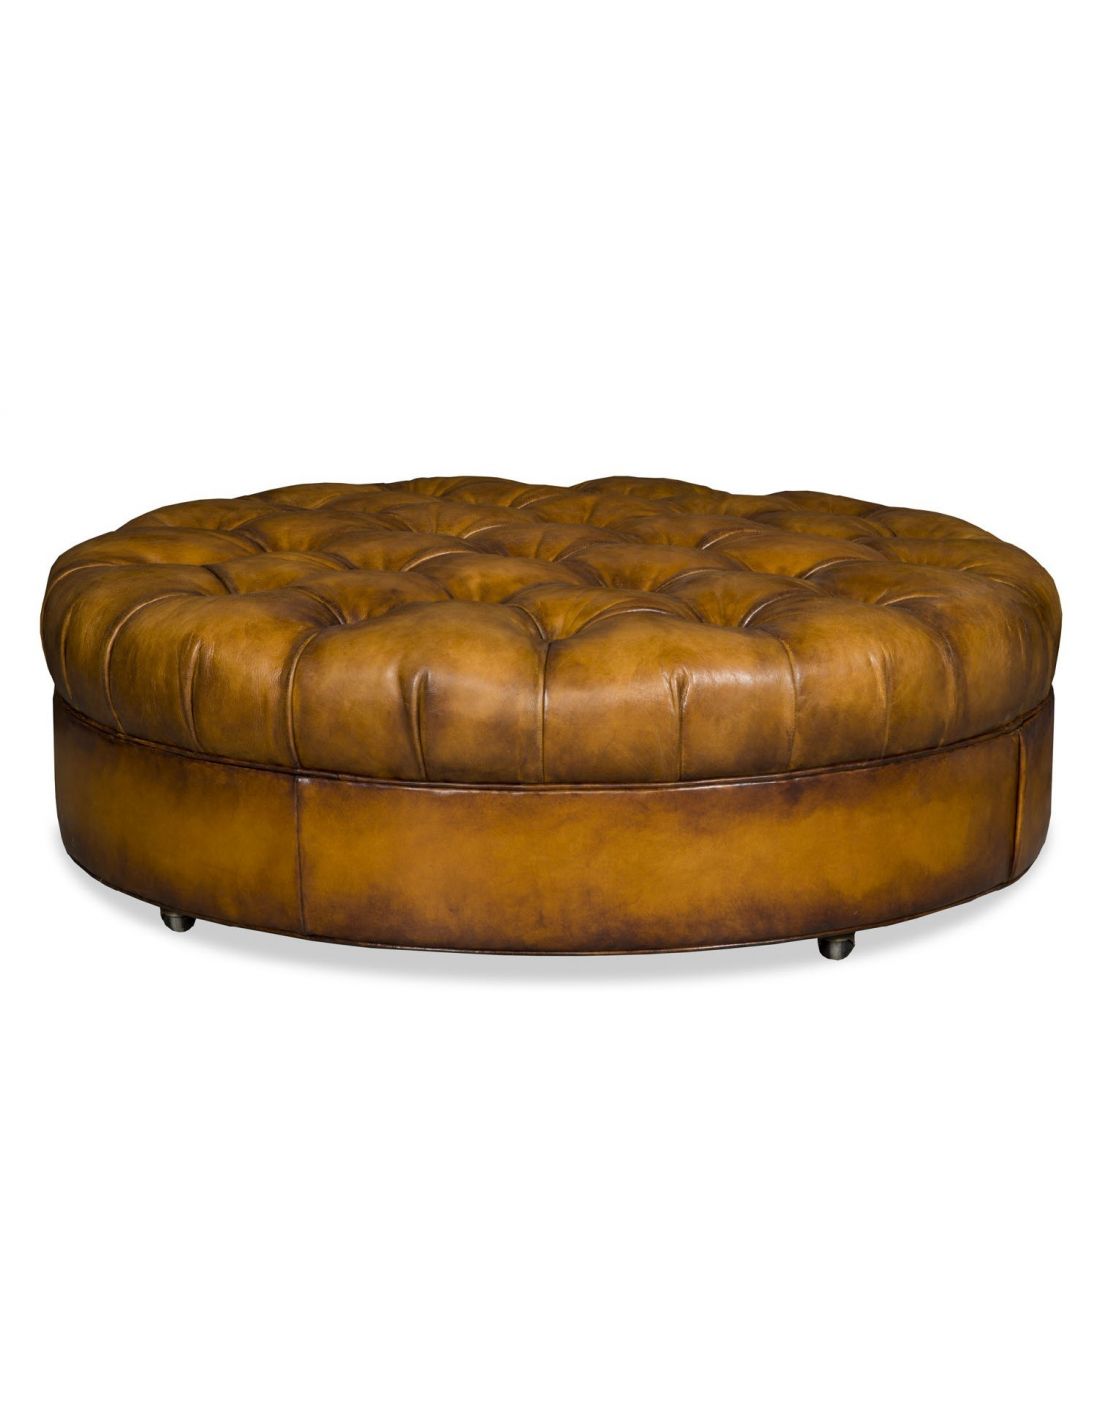 Round Leather Tufted Ottoman, Brown Leather Ottomans